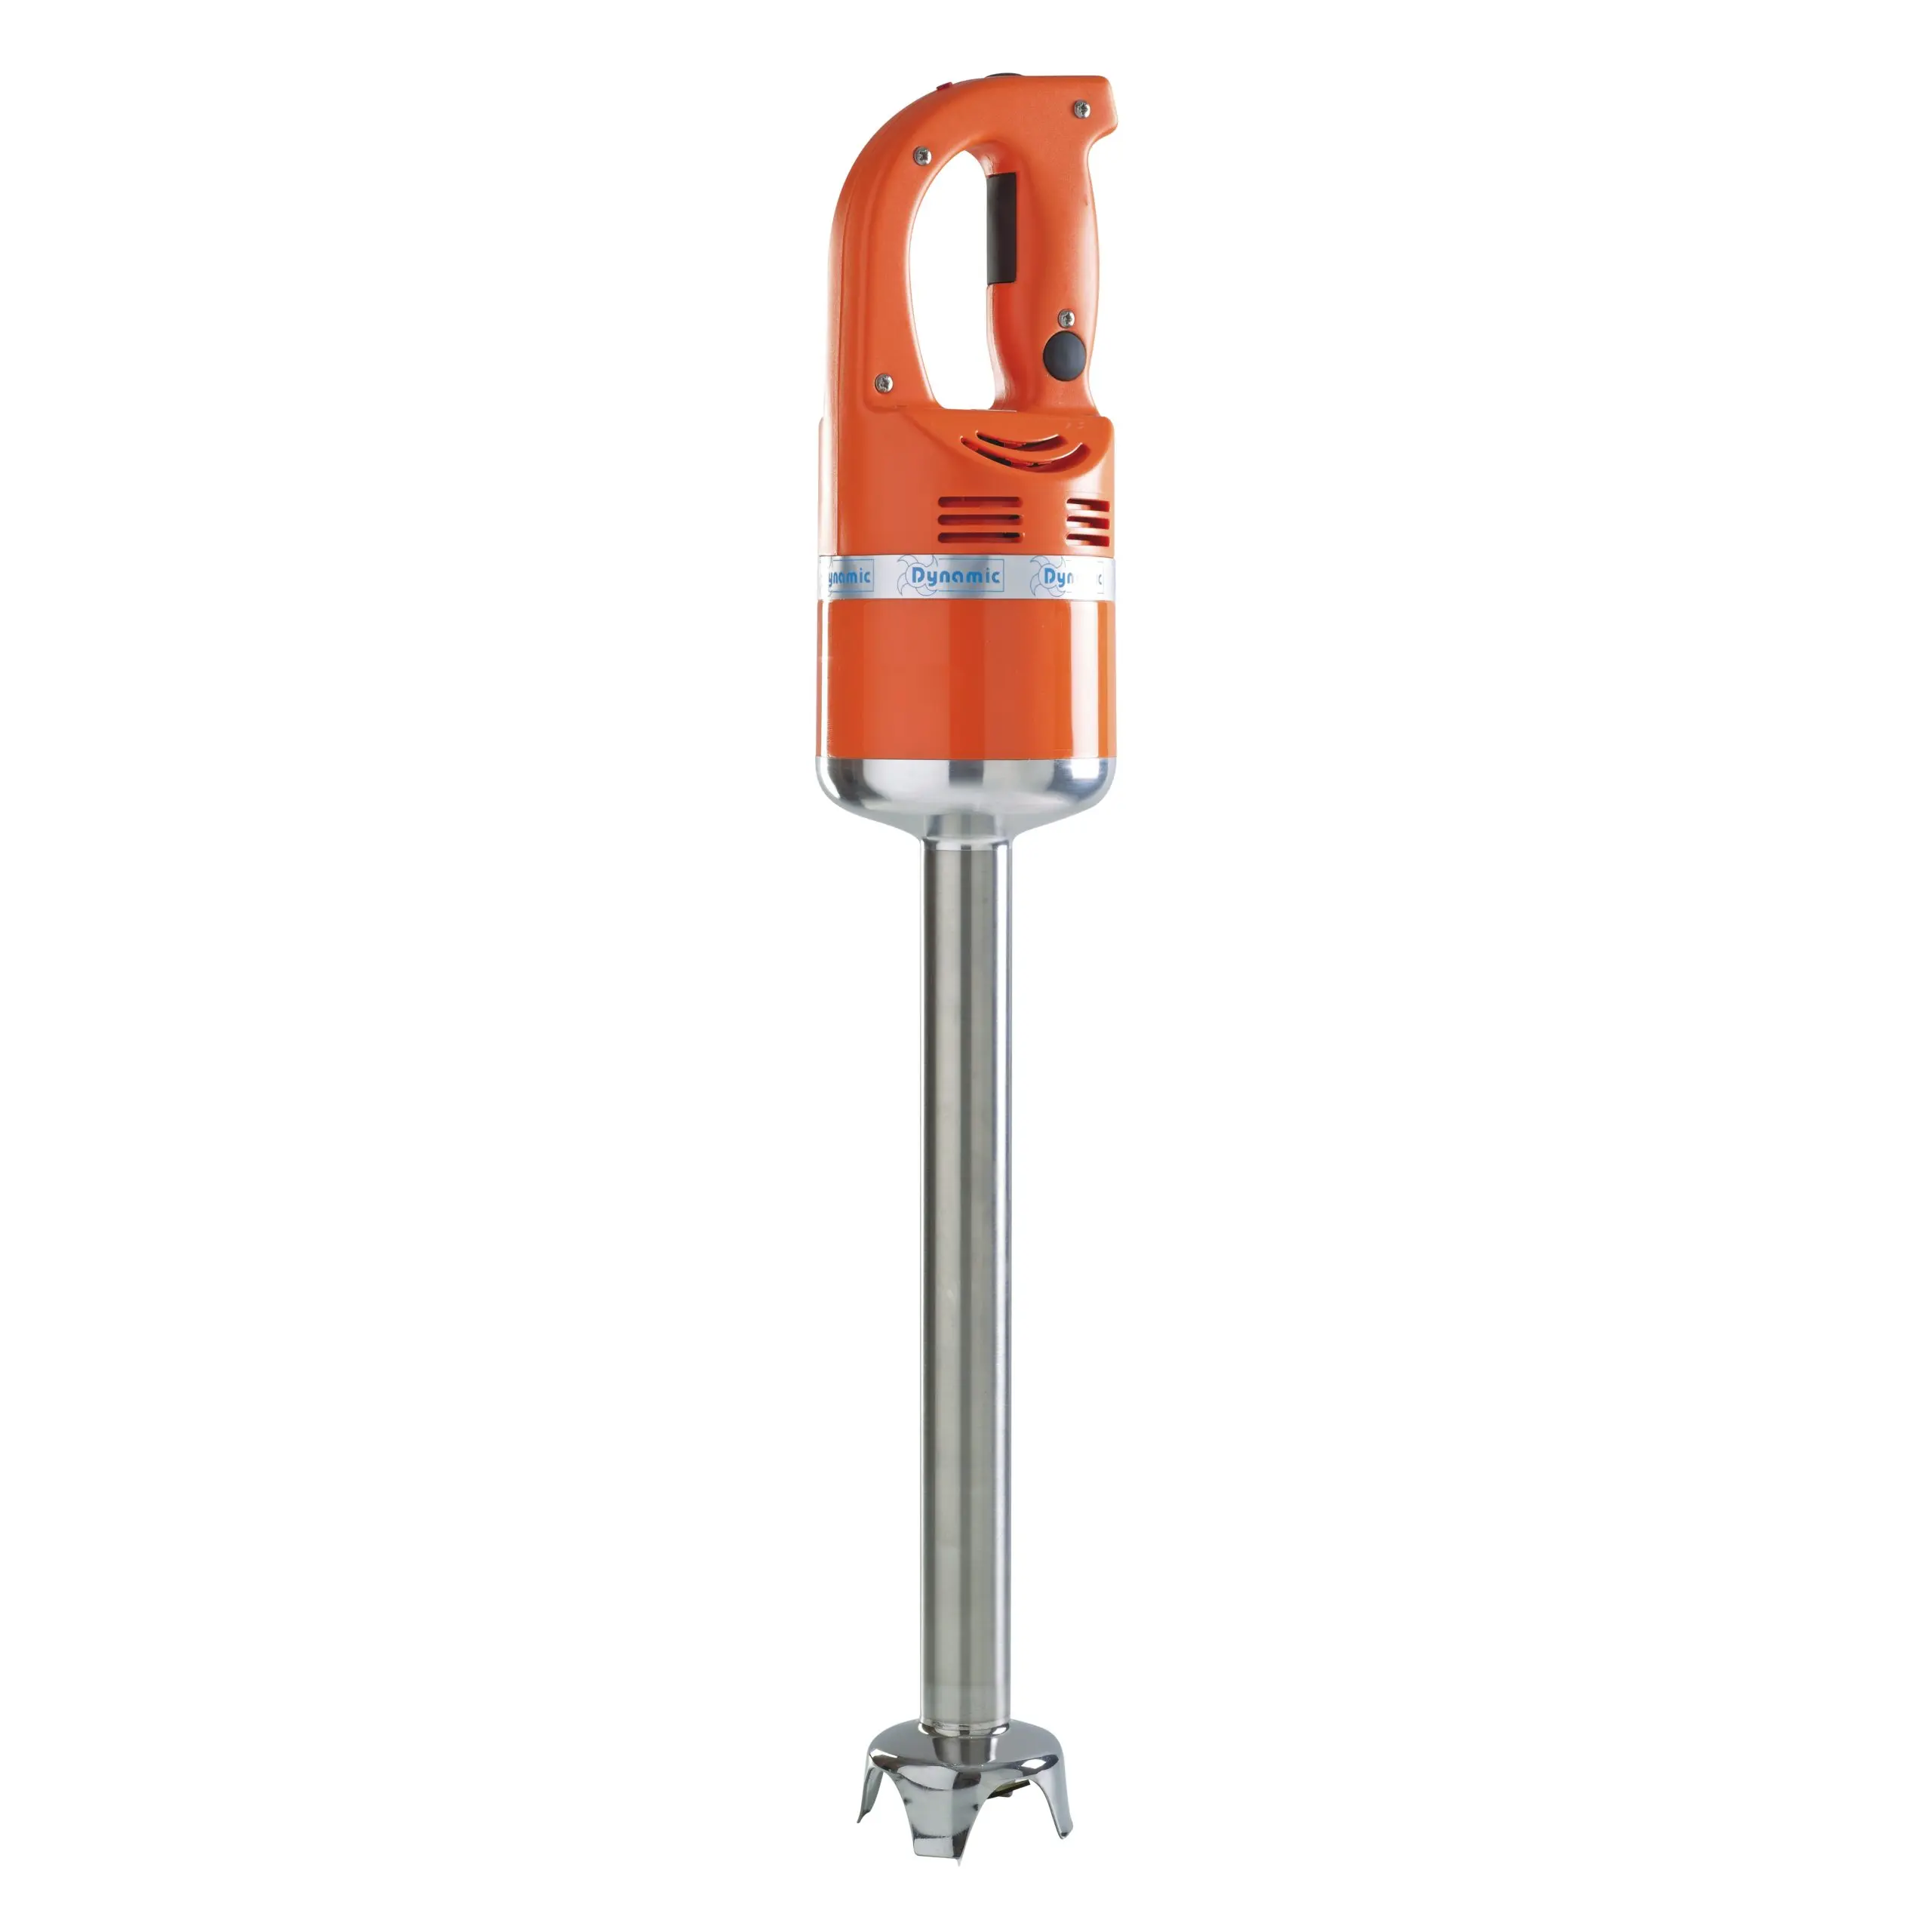 Dynamic MX020.1 Junior Standard (Non-Detachable) Mixer, Single Speed,  Immersible Tube 9 Inch Long